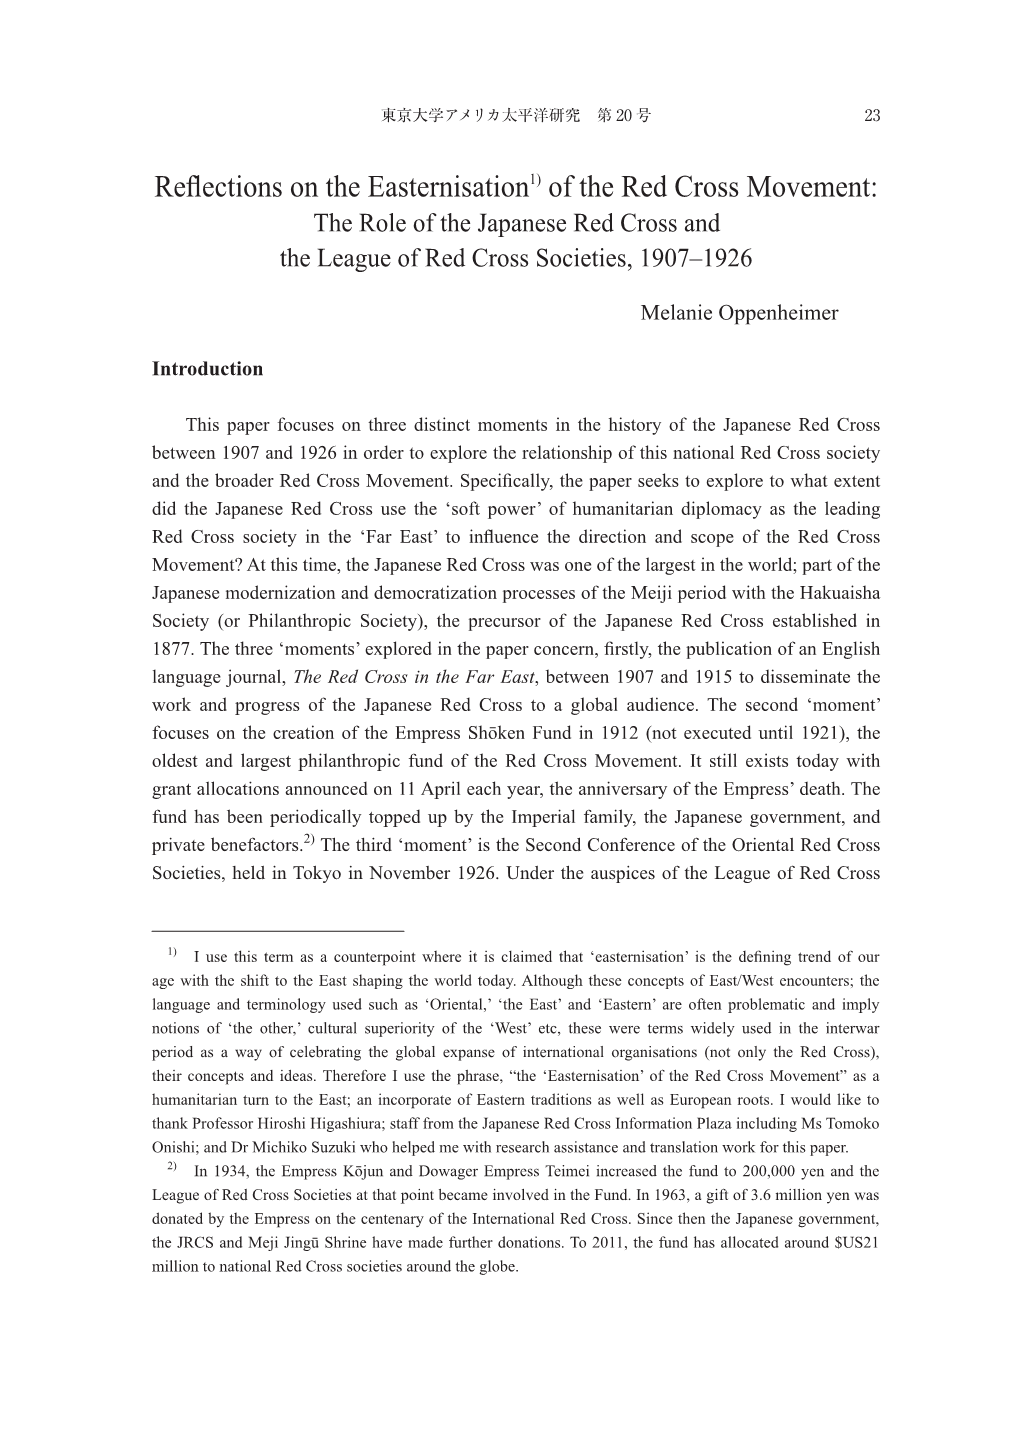 Reflections on the Easternisation1) of the Red Cross Movement: the Role of the Japanese Red Cross and the League of Red Cross Societies, 1907–1926